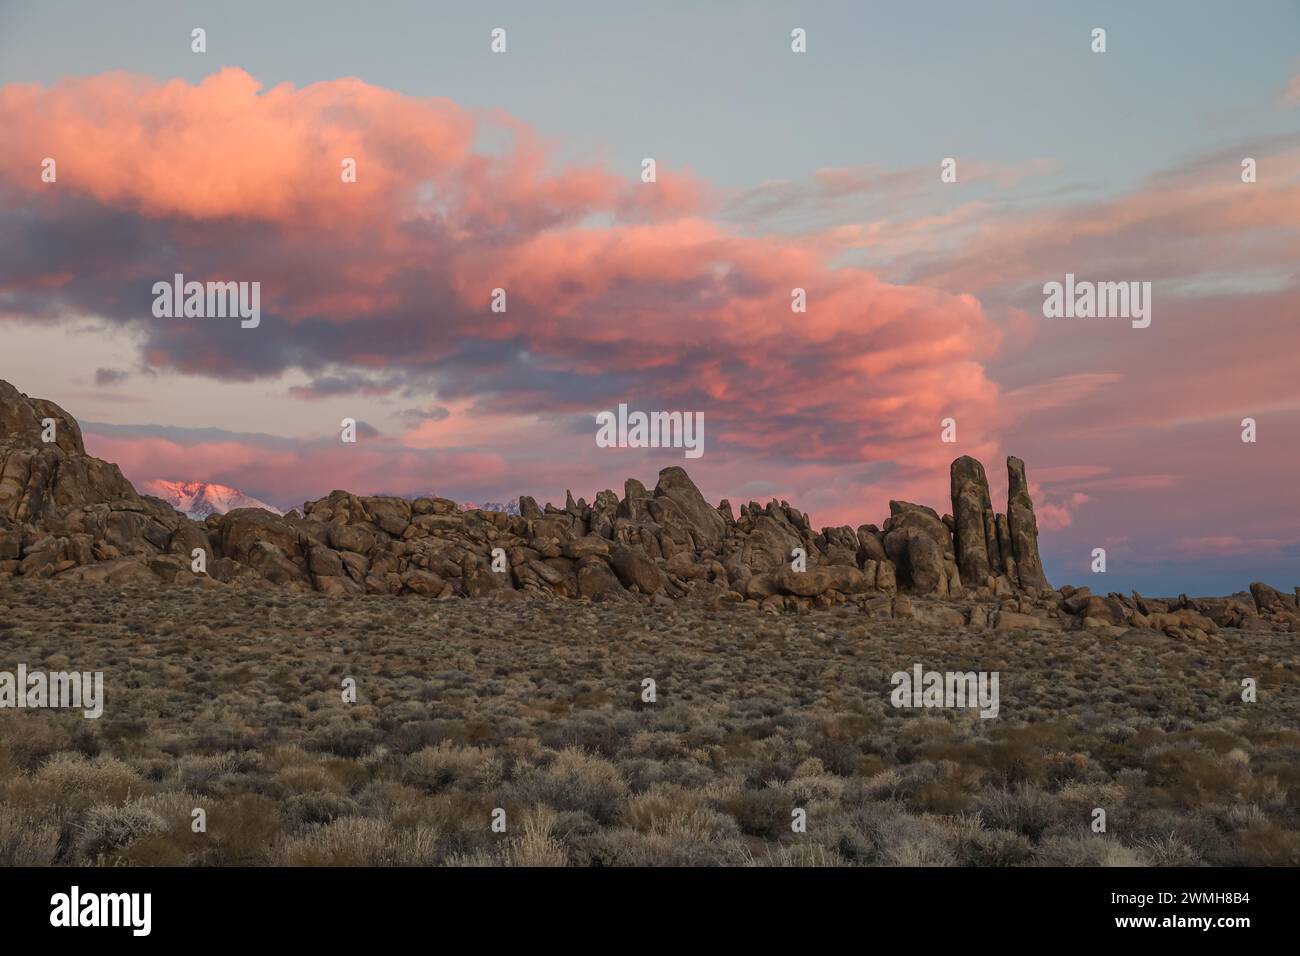 A colorful sunrise sky hovers in dramatic fashion above a complex rock and boulder feature in California's Alabama Hills. Stock Photo